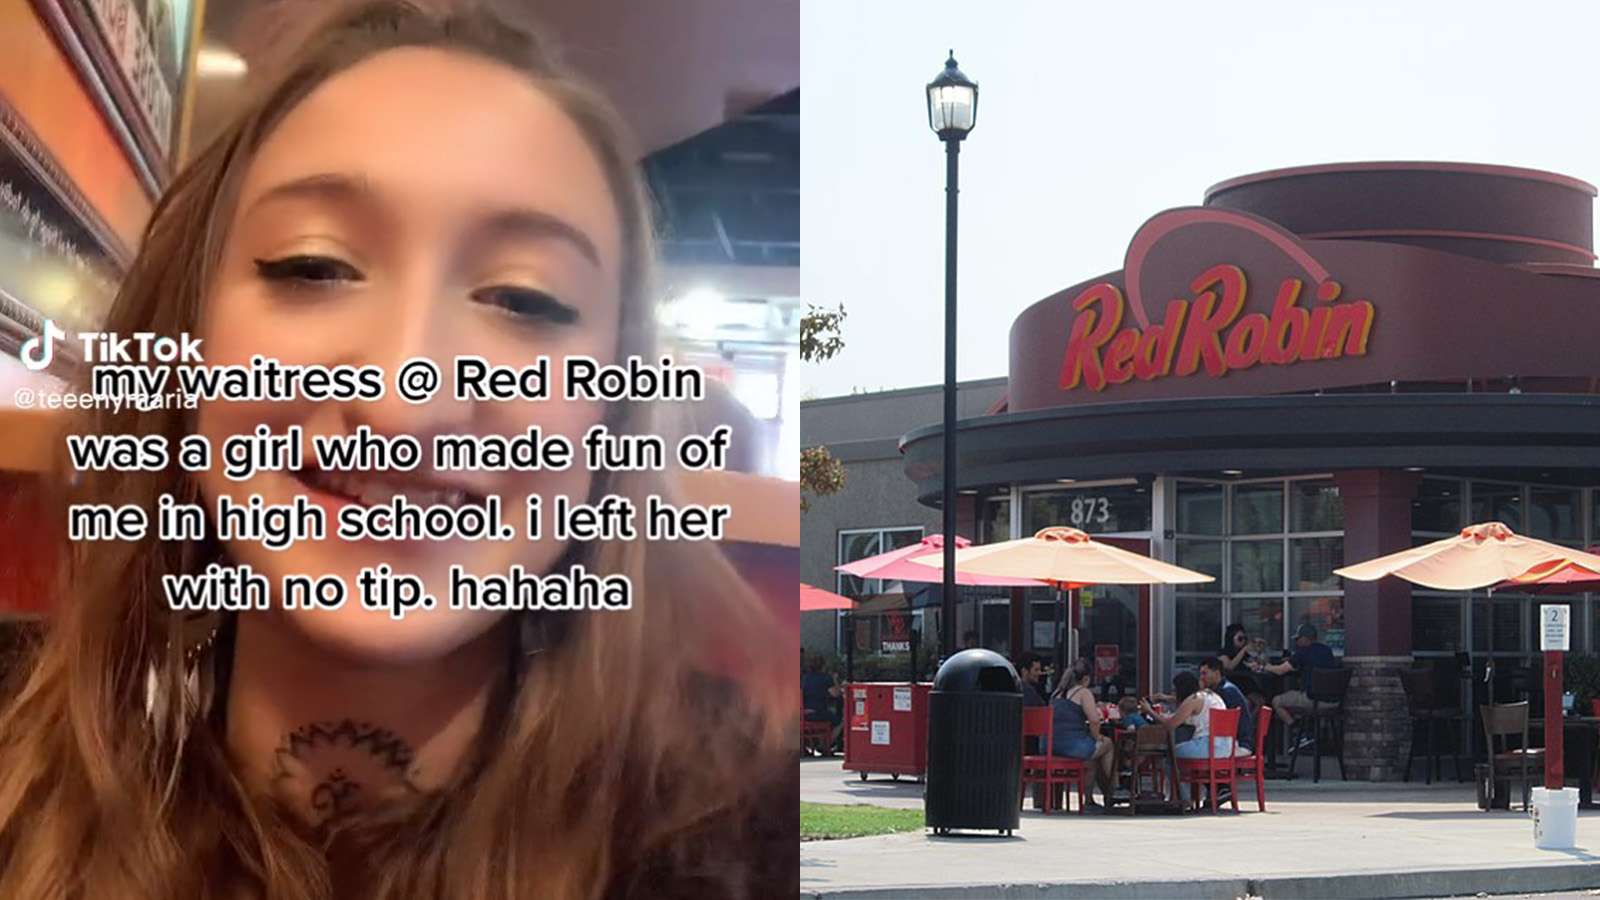 TikToker brags about not tipping red robin waitress, sparks debate